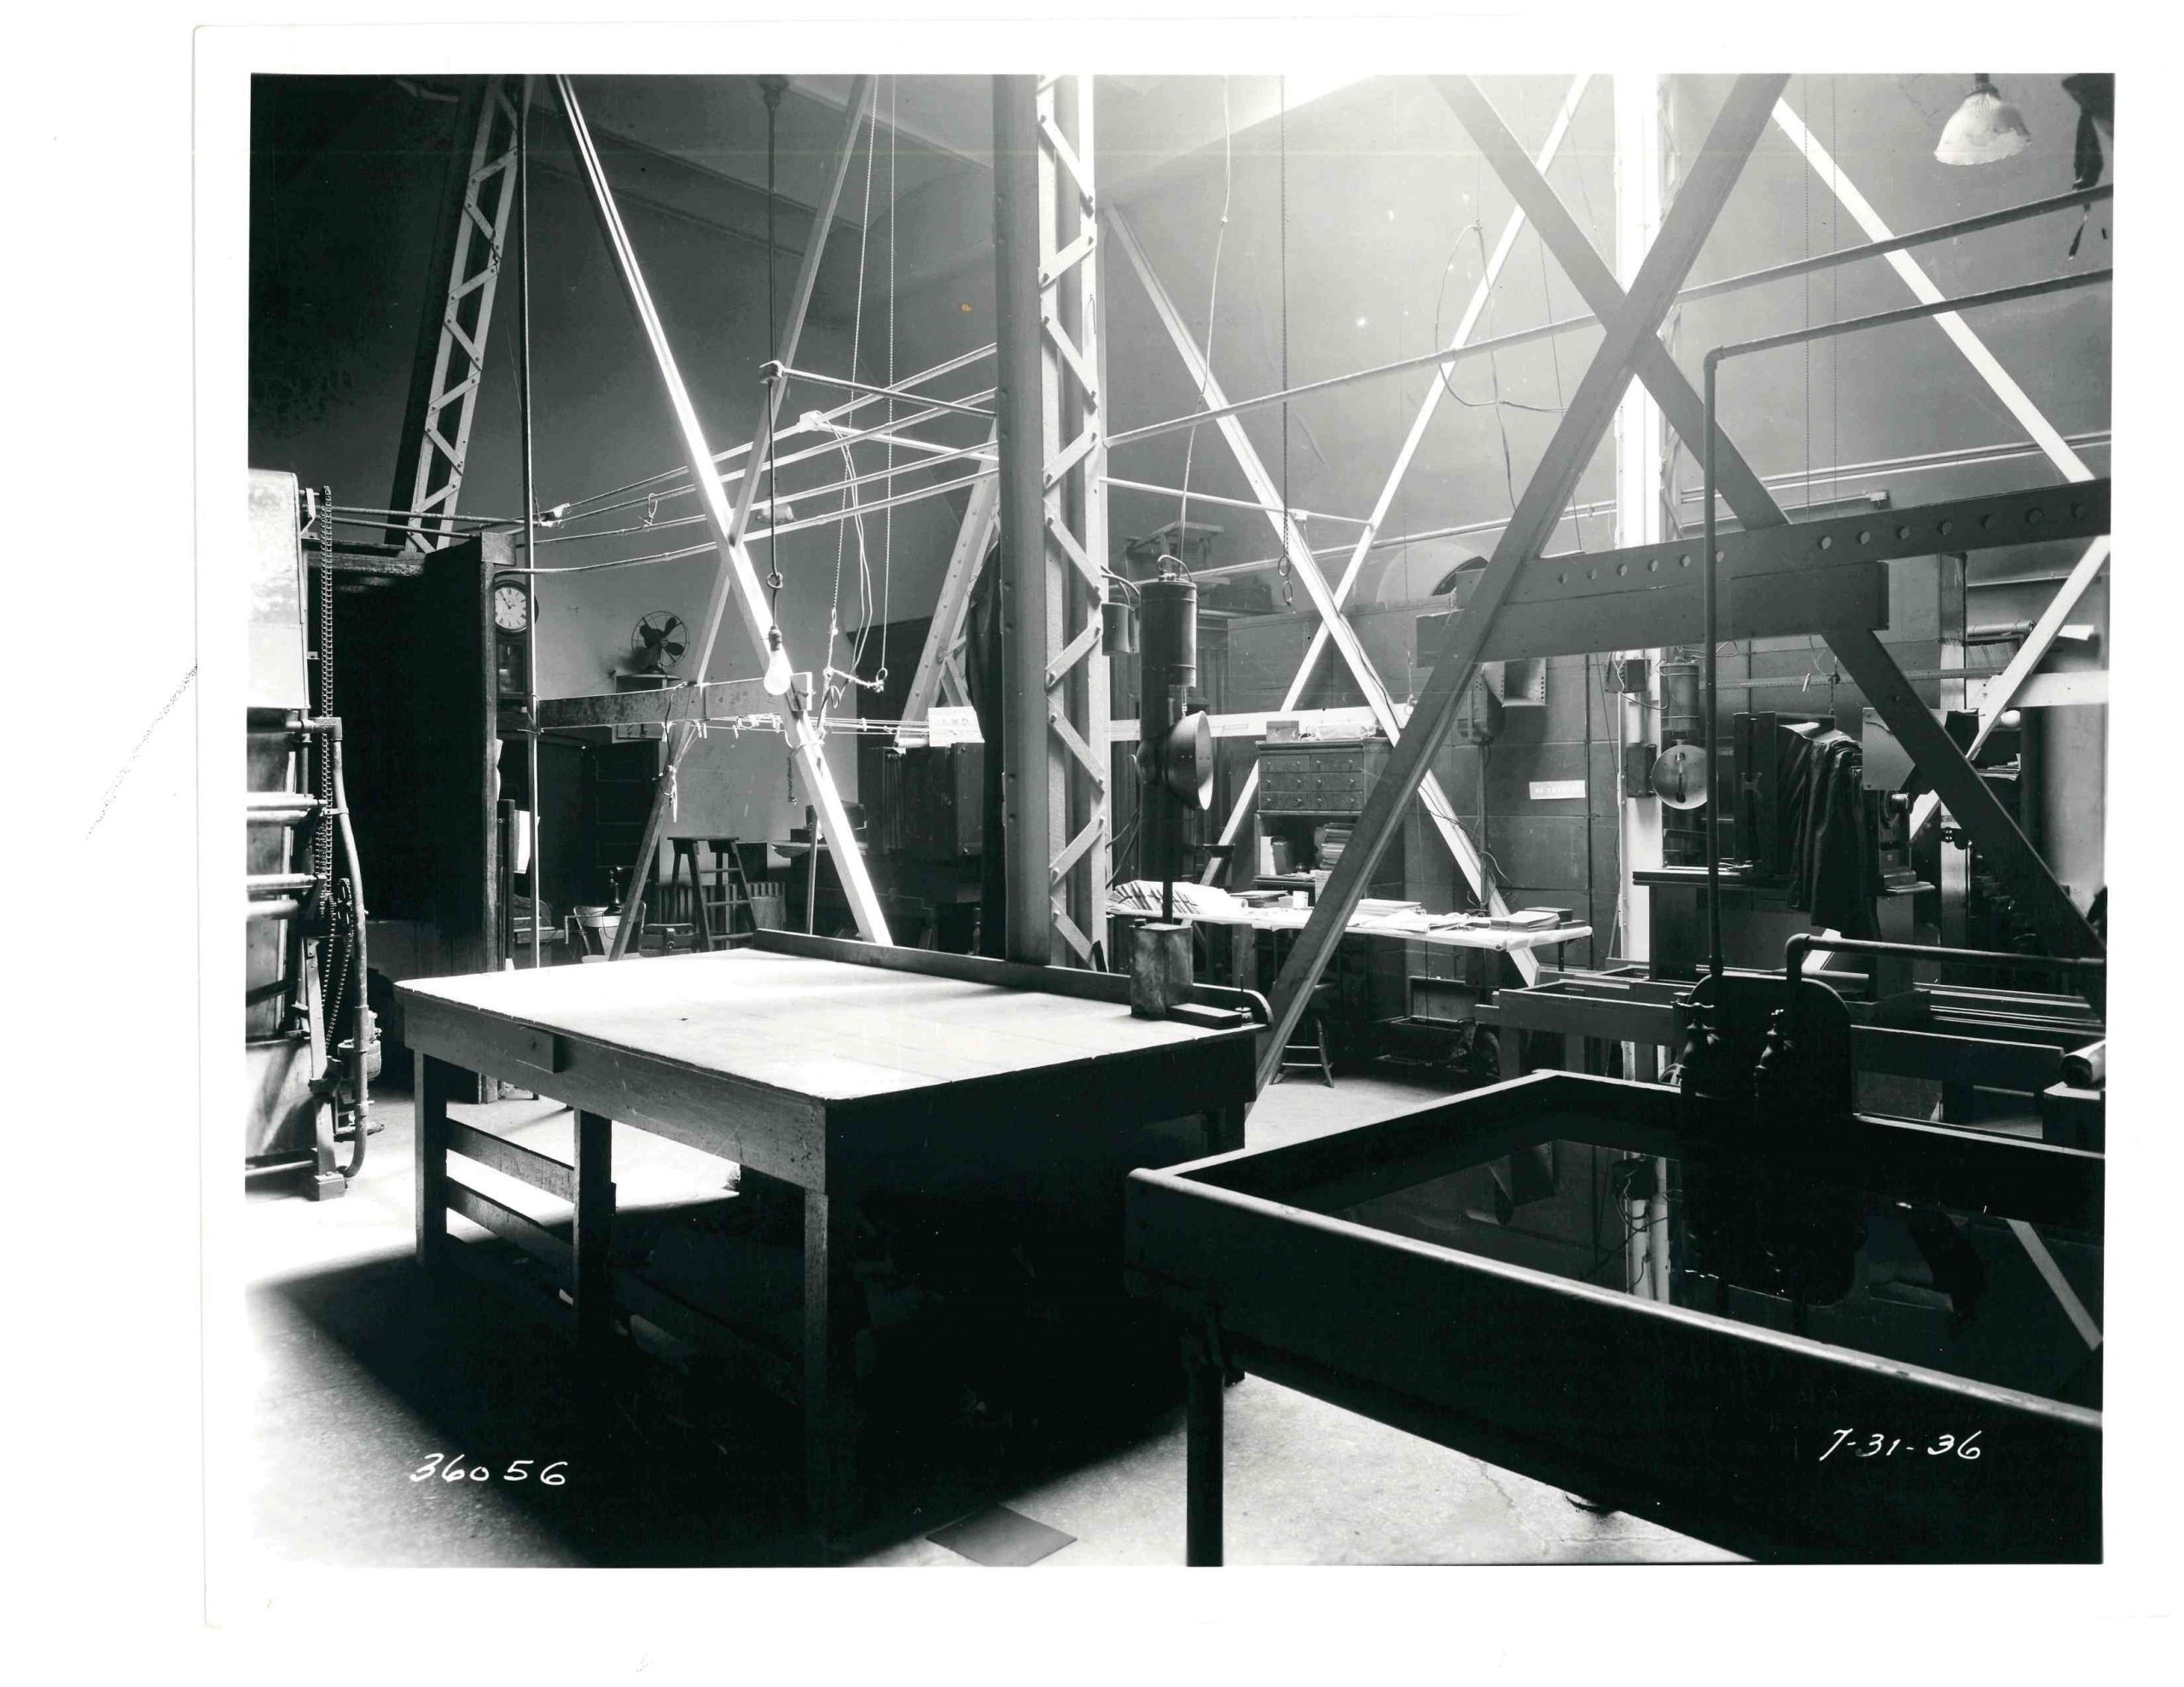 a black and white photograph dipicting a large room with tables and equipment for developing film